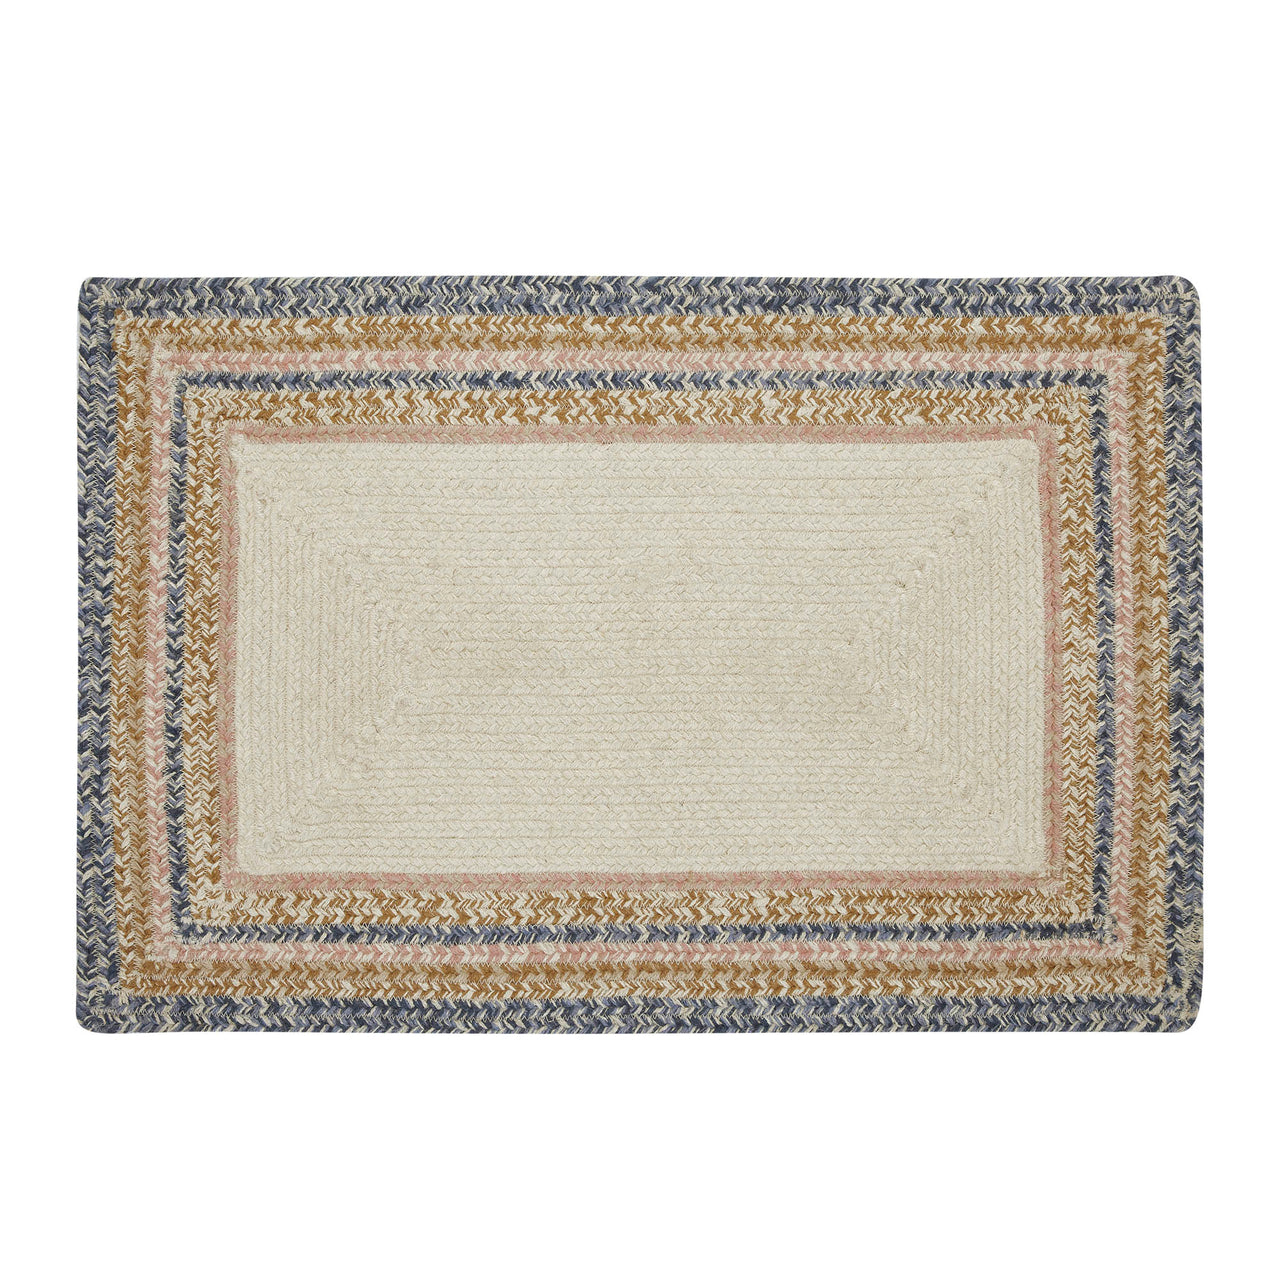 Kaila Happy Spring Jute Braided Rug Rect. with Rug Pad 20"x30" VHC Brands